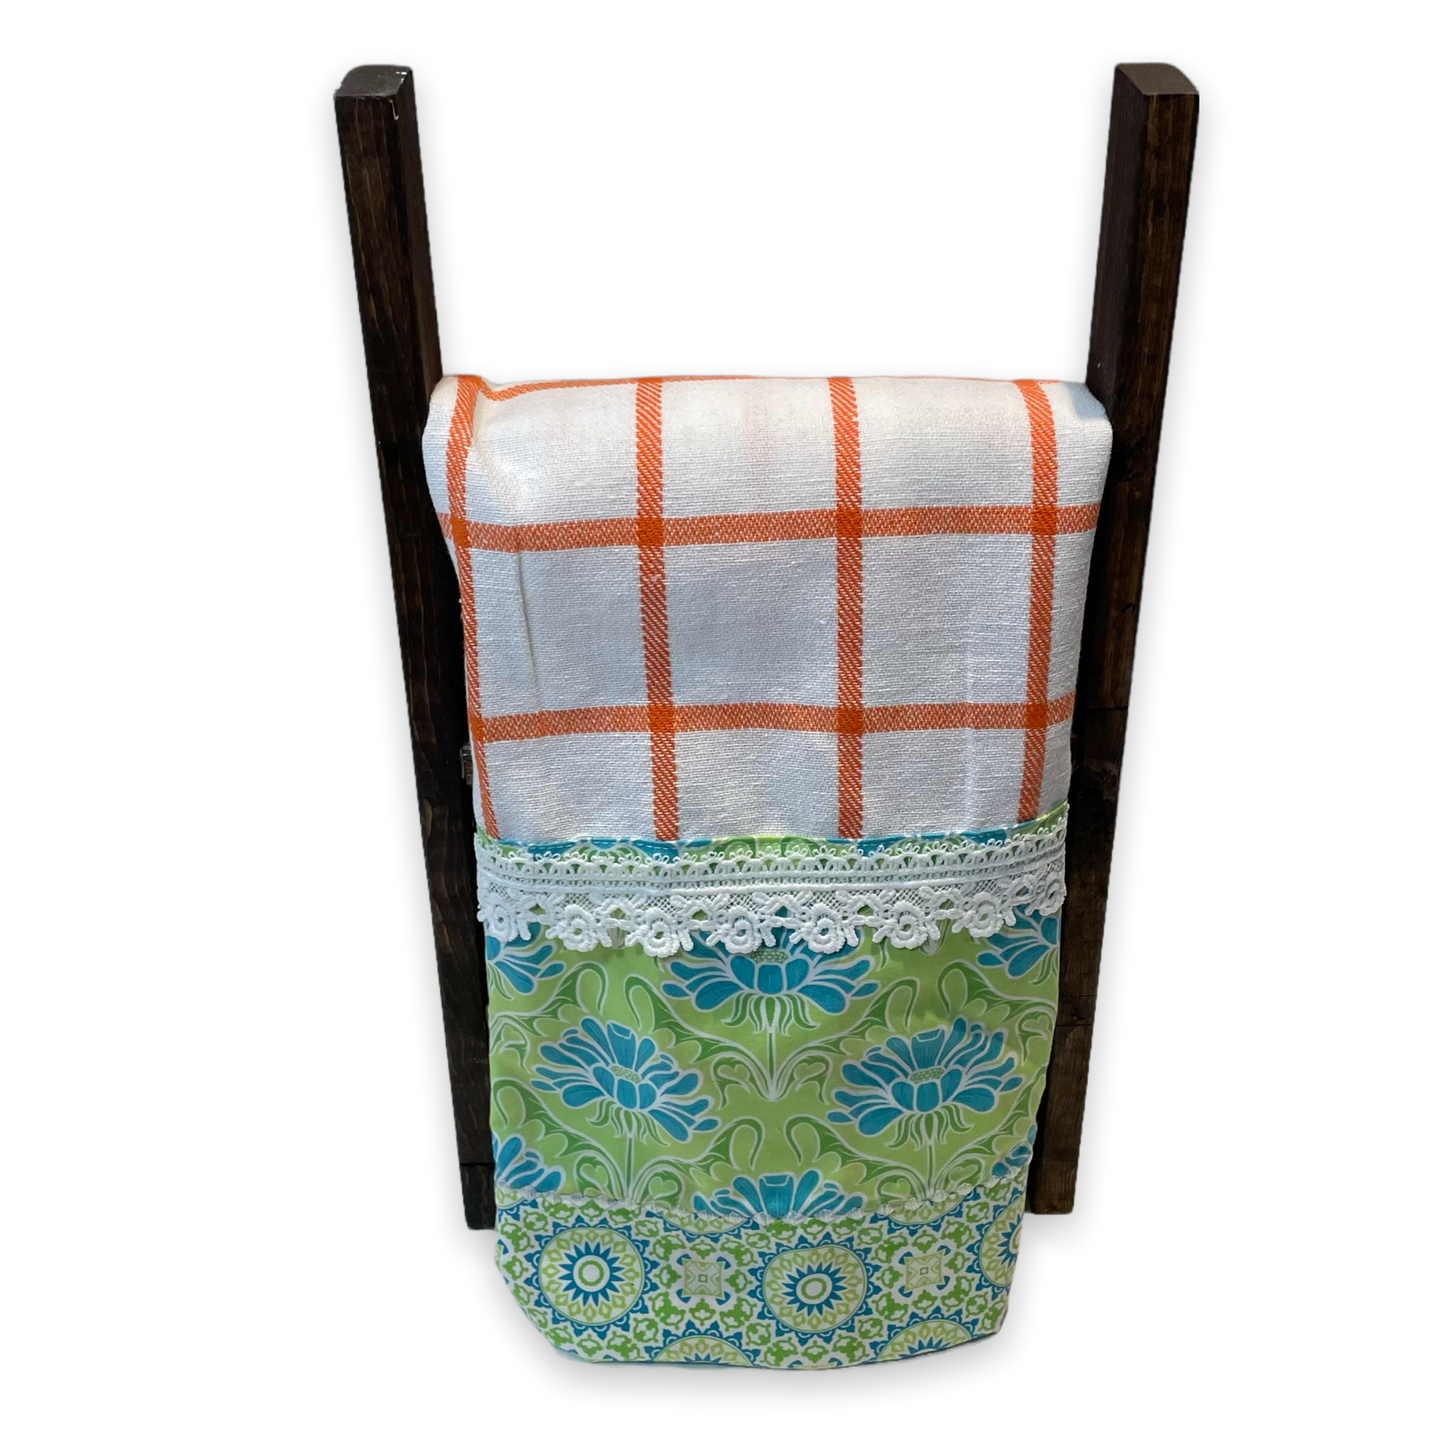 Cute Retro Decorative Dish Towel. Orange and White Checked Tea Towel with Handcrafted Accents - Home Stitchery Decor